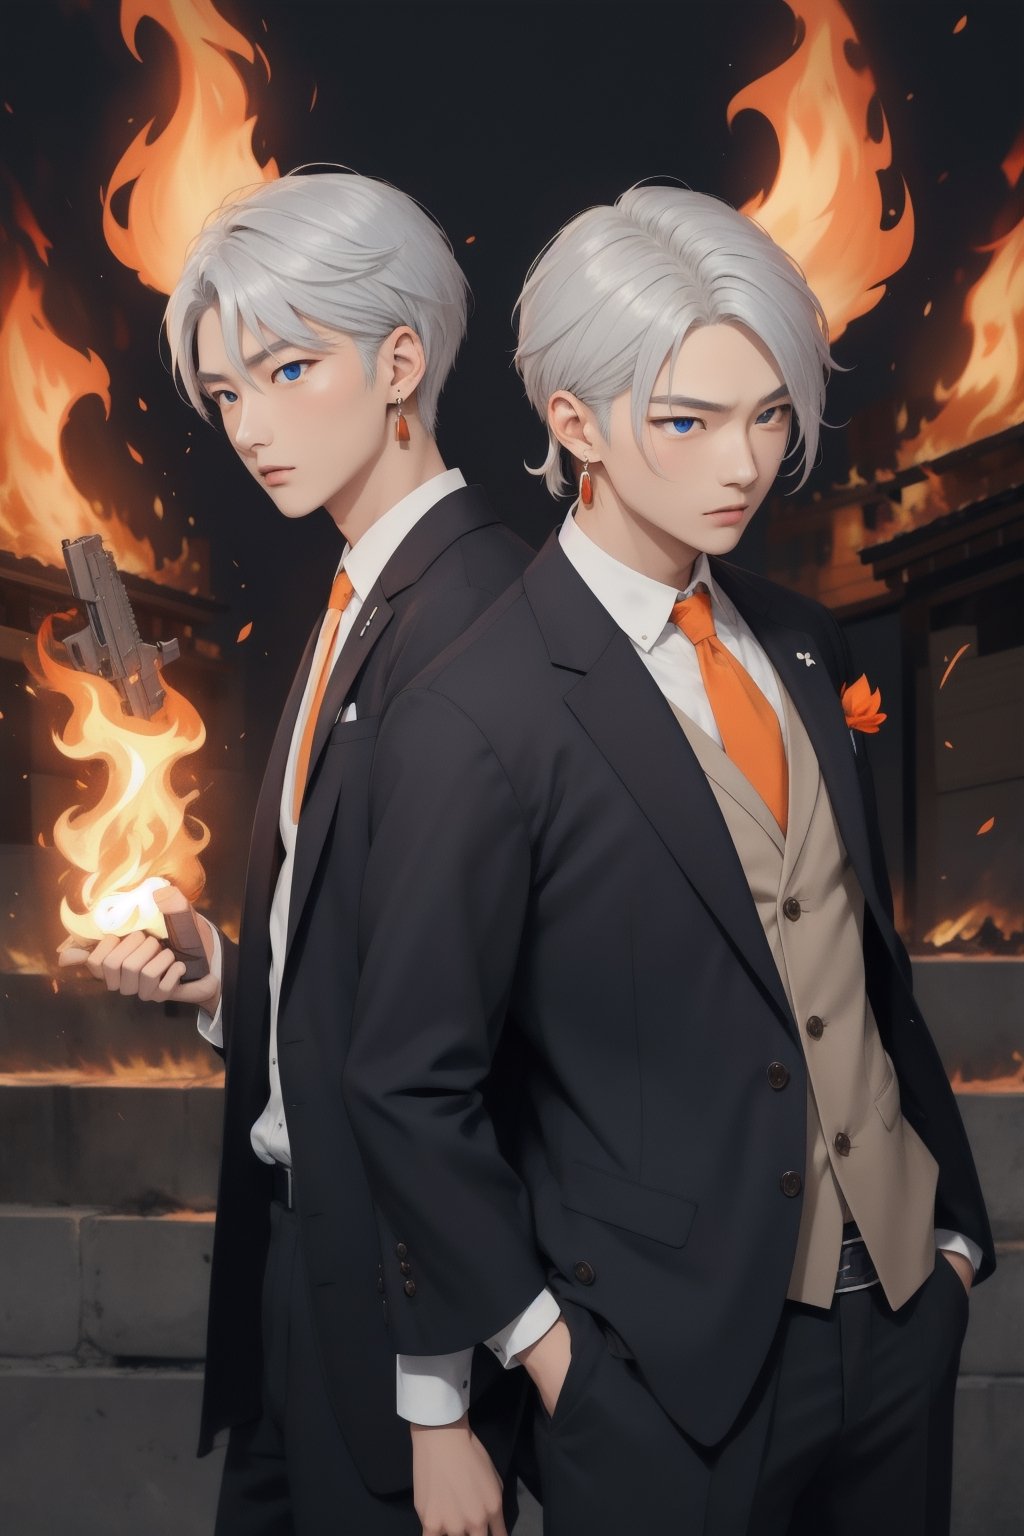 intricate detail, two young Japansehandsome males with suit and holding guns, fighting, blue eyes, handsome, earrings, silver hair, earrings, big blue flame, big orange flame, 